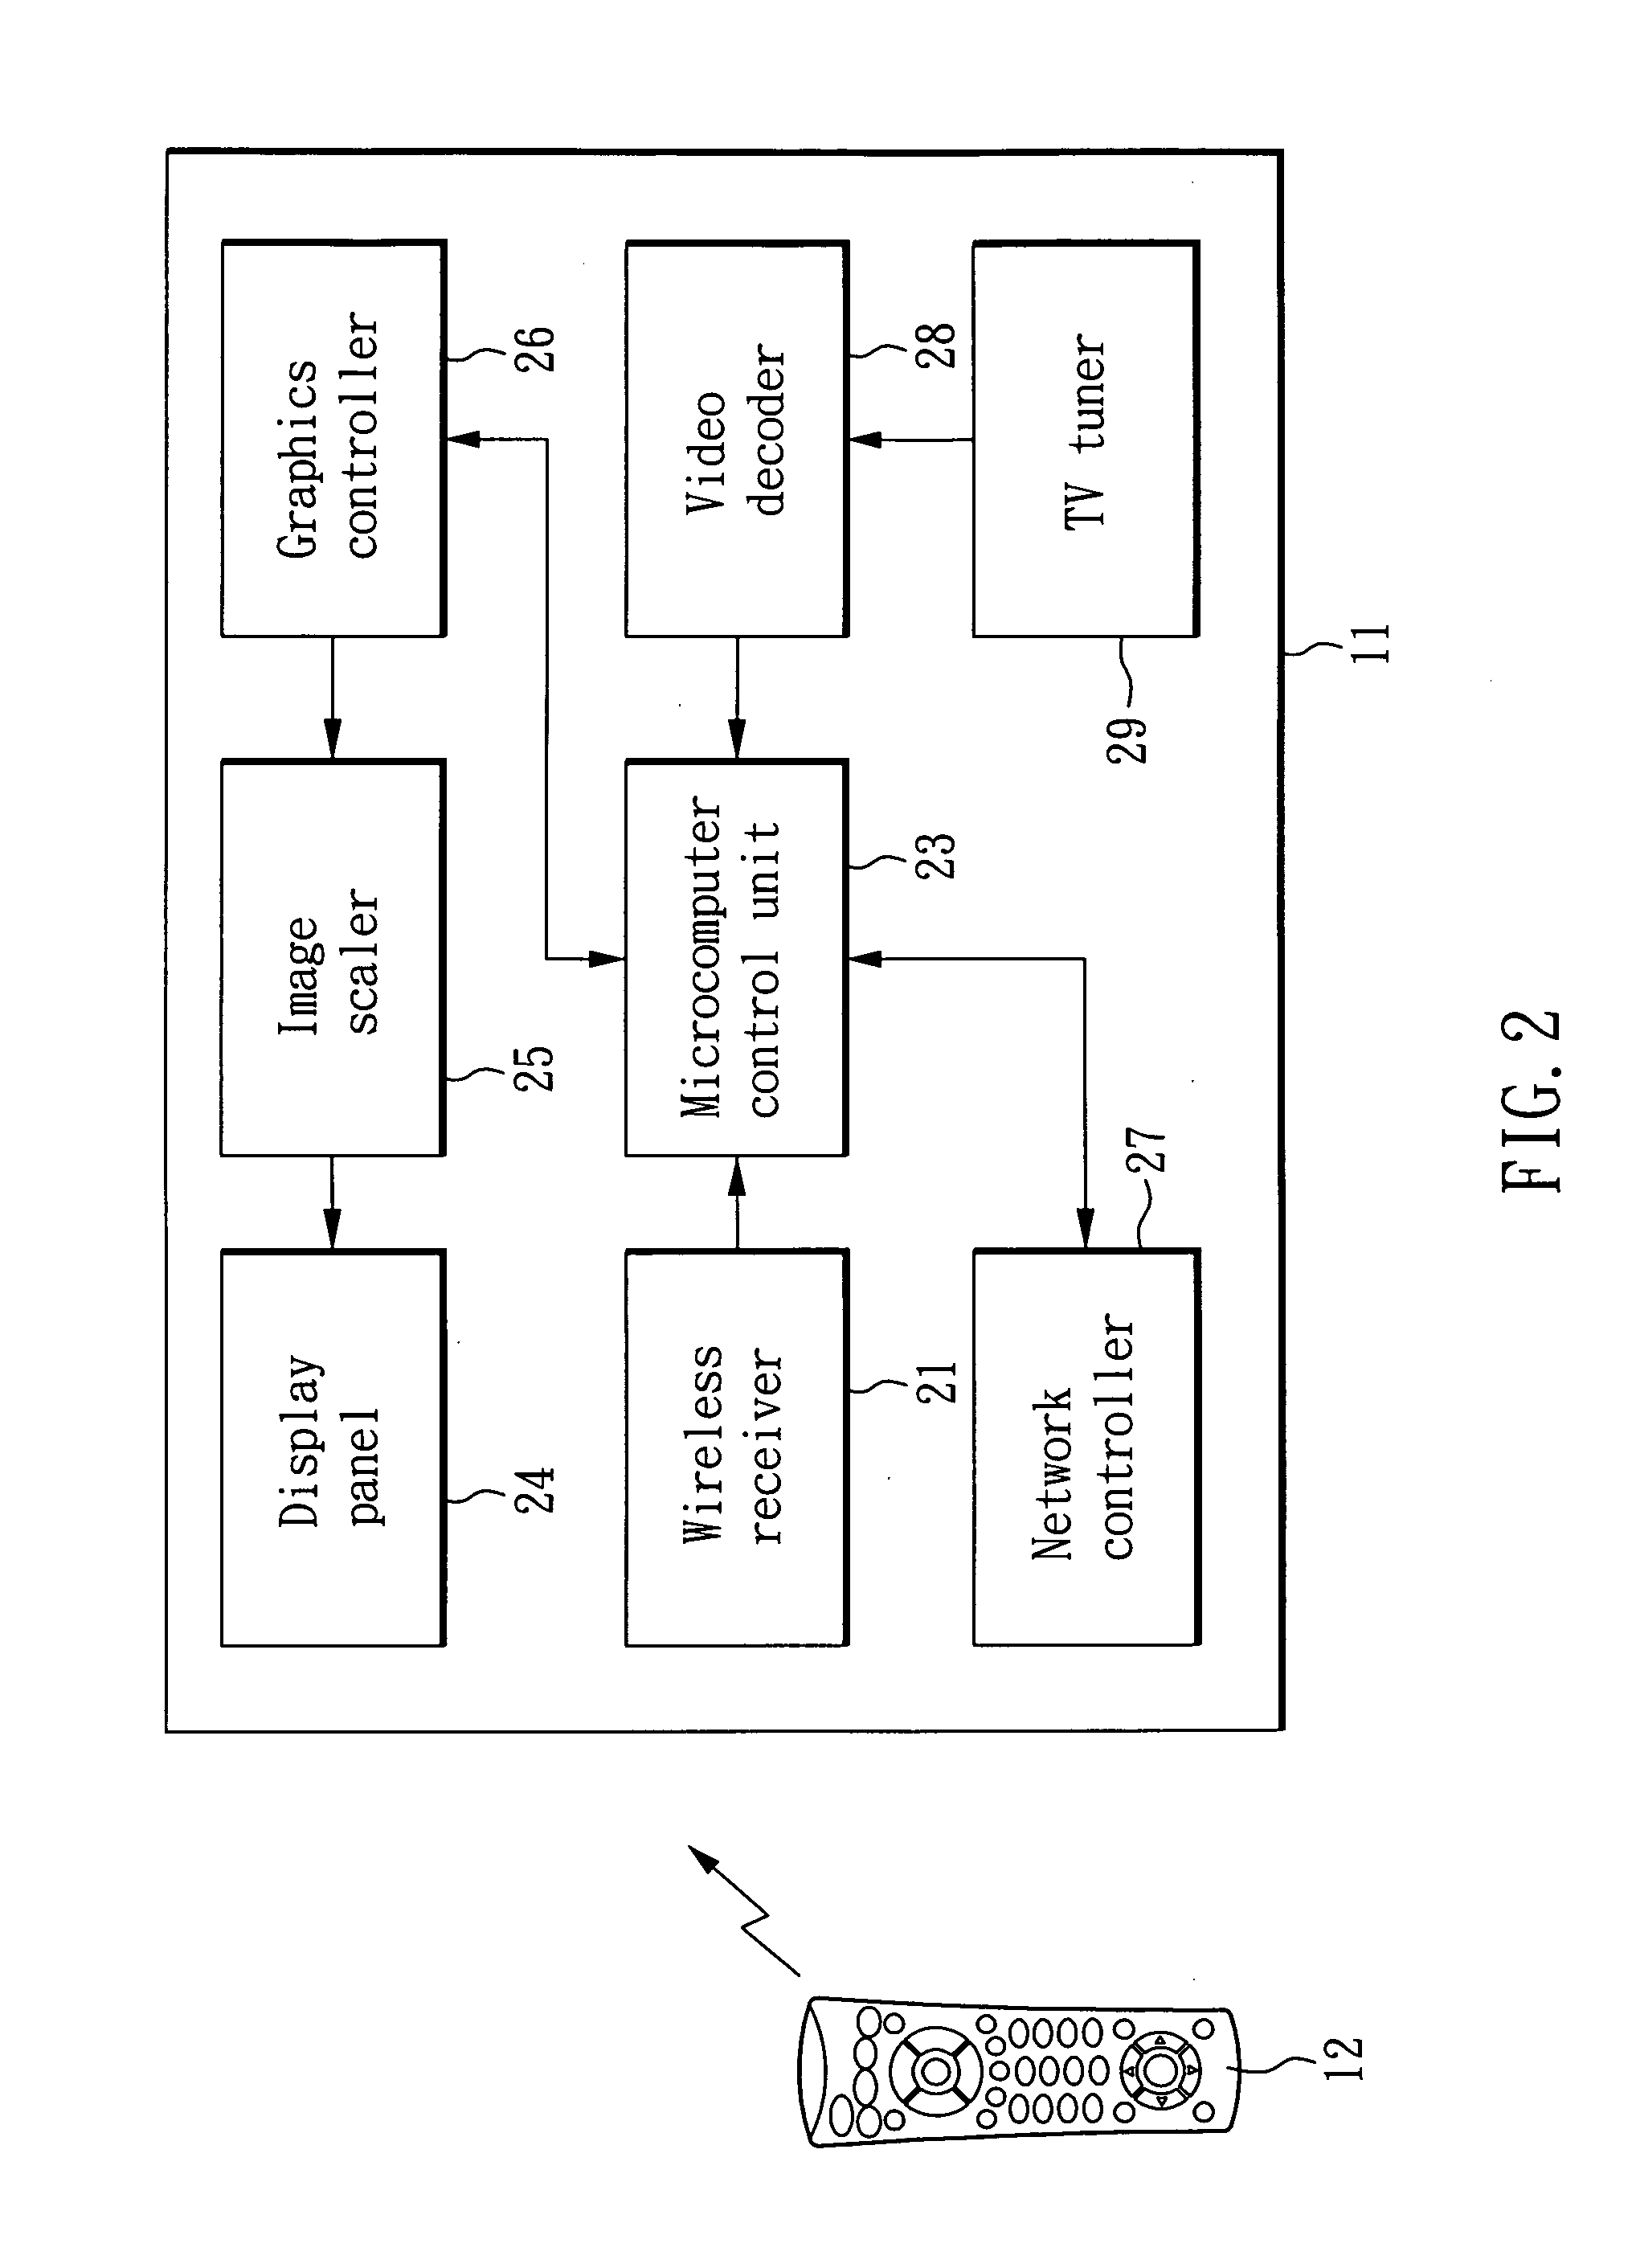 Nine-square virtual input system using a remote control